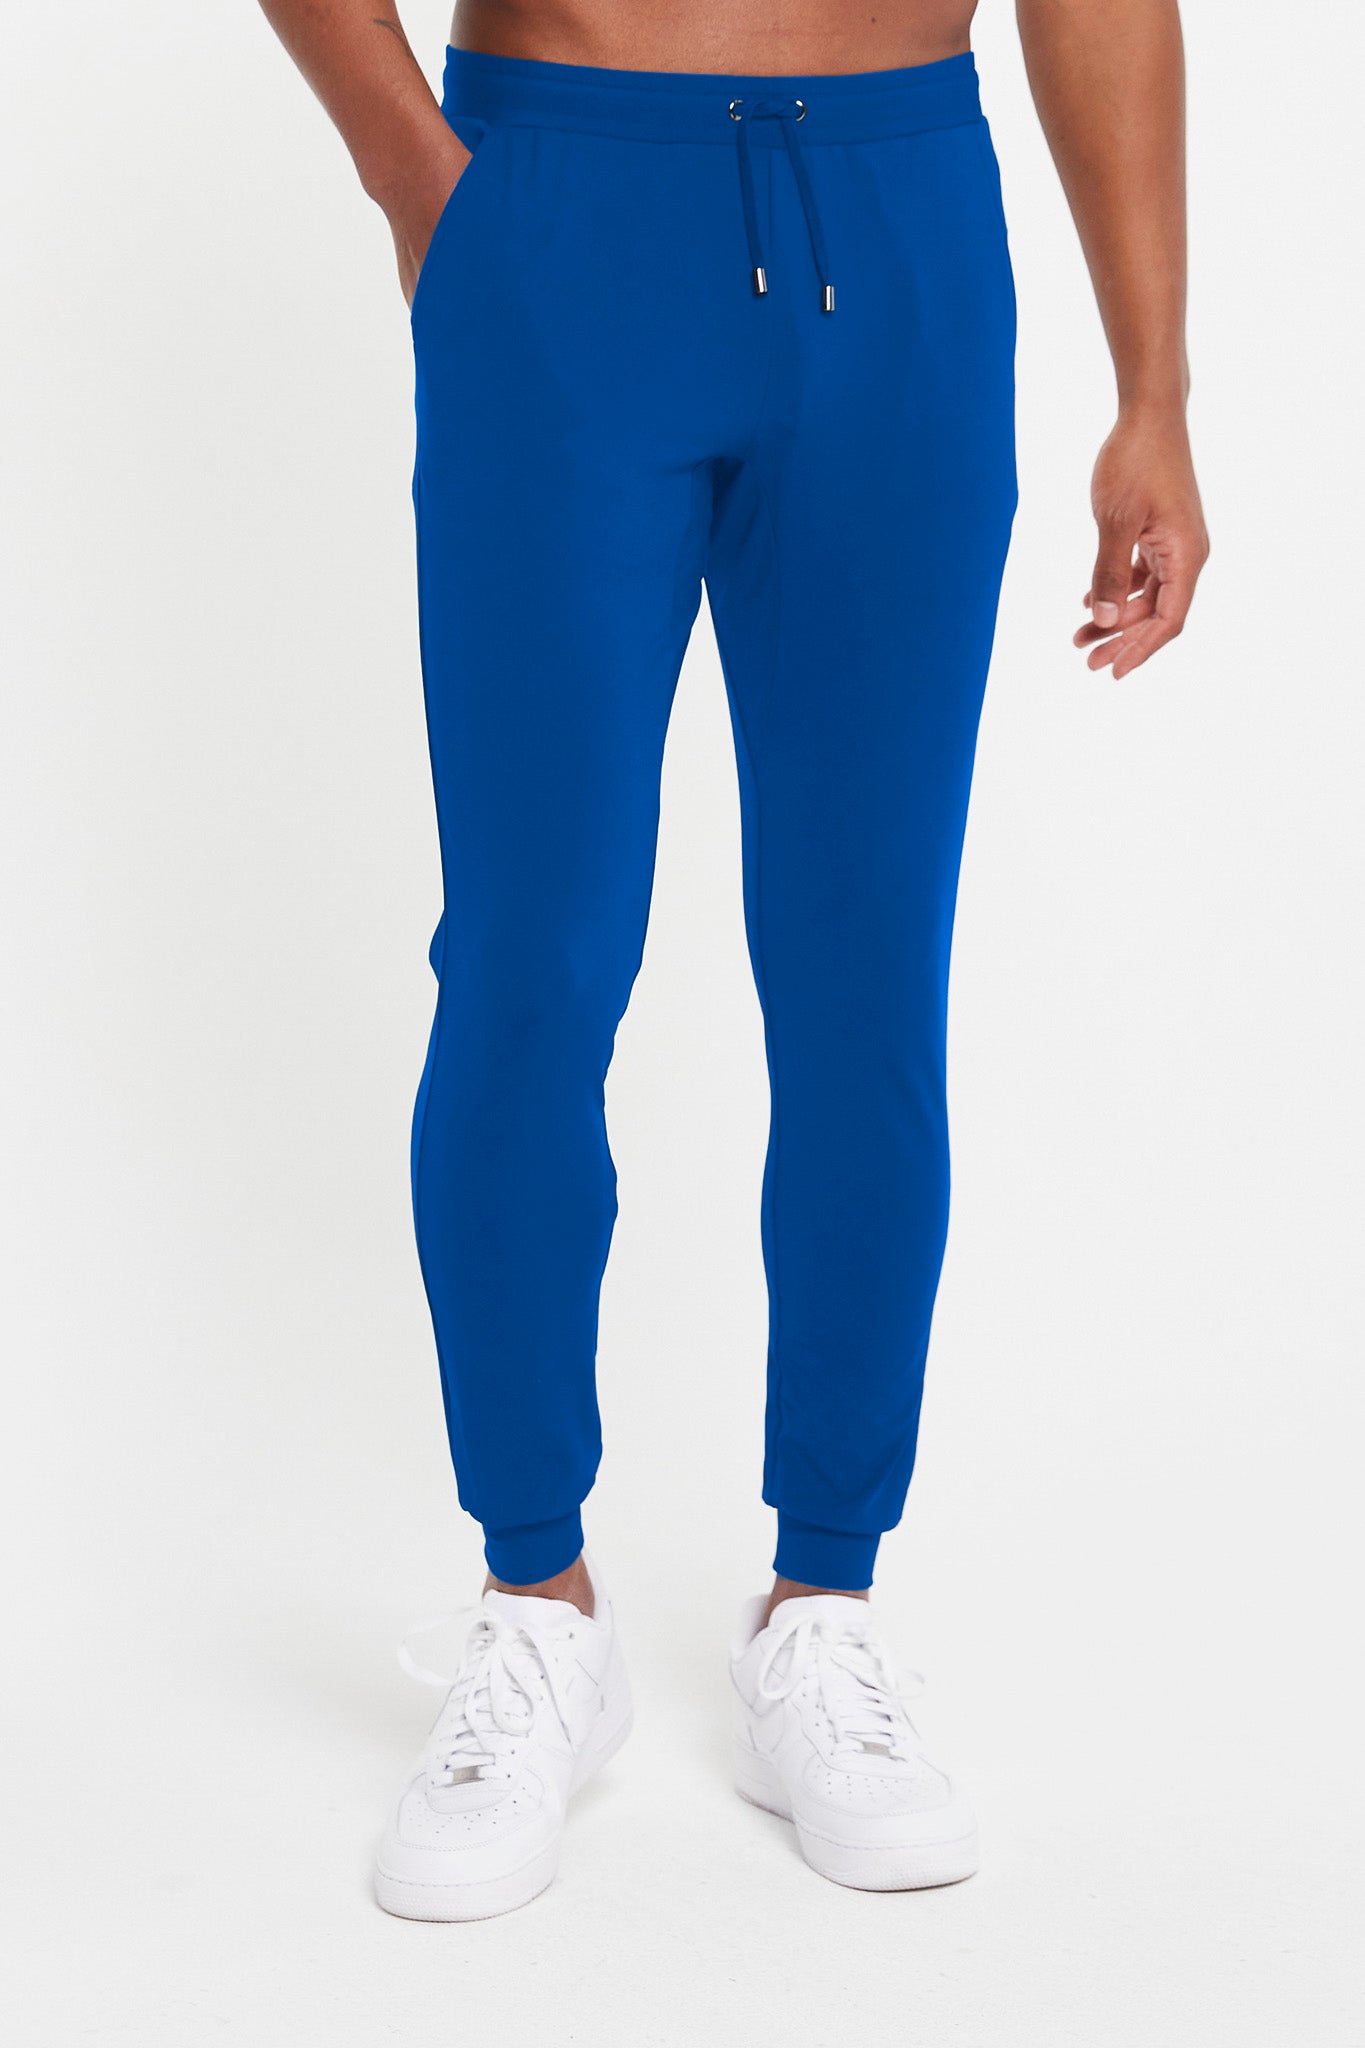 Image of the donahue jogger in classic blue